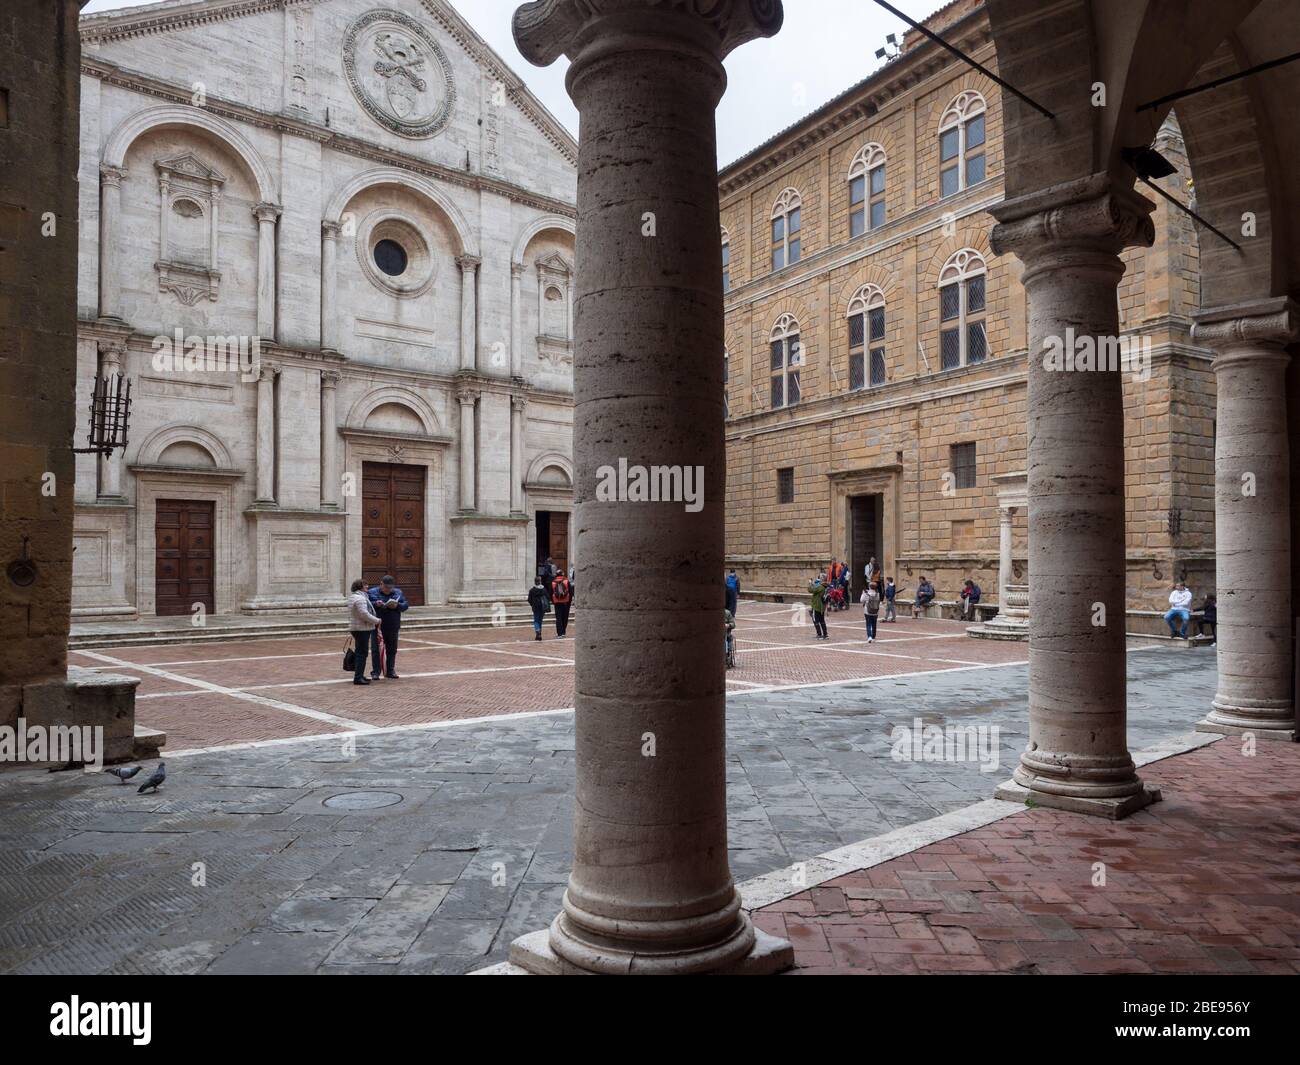 Pienza, Italy - April 23, 2019: The cathedral of Santa Maria Assunta is the main place of worship in Pienza. View from the opposite colonnade. Stock Photo